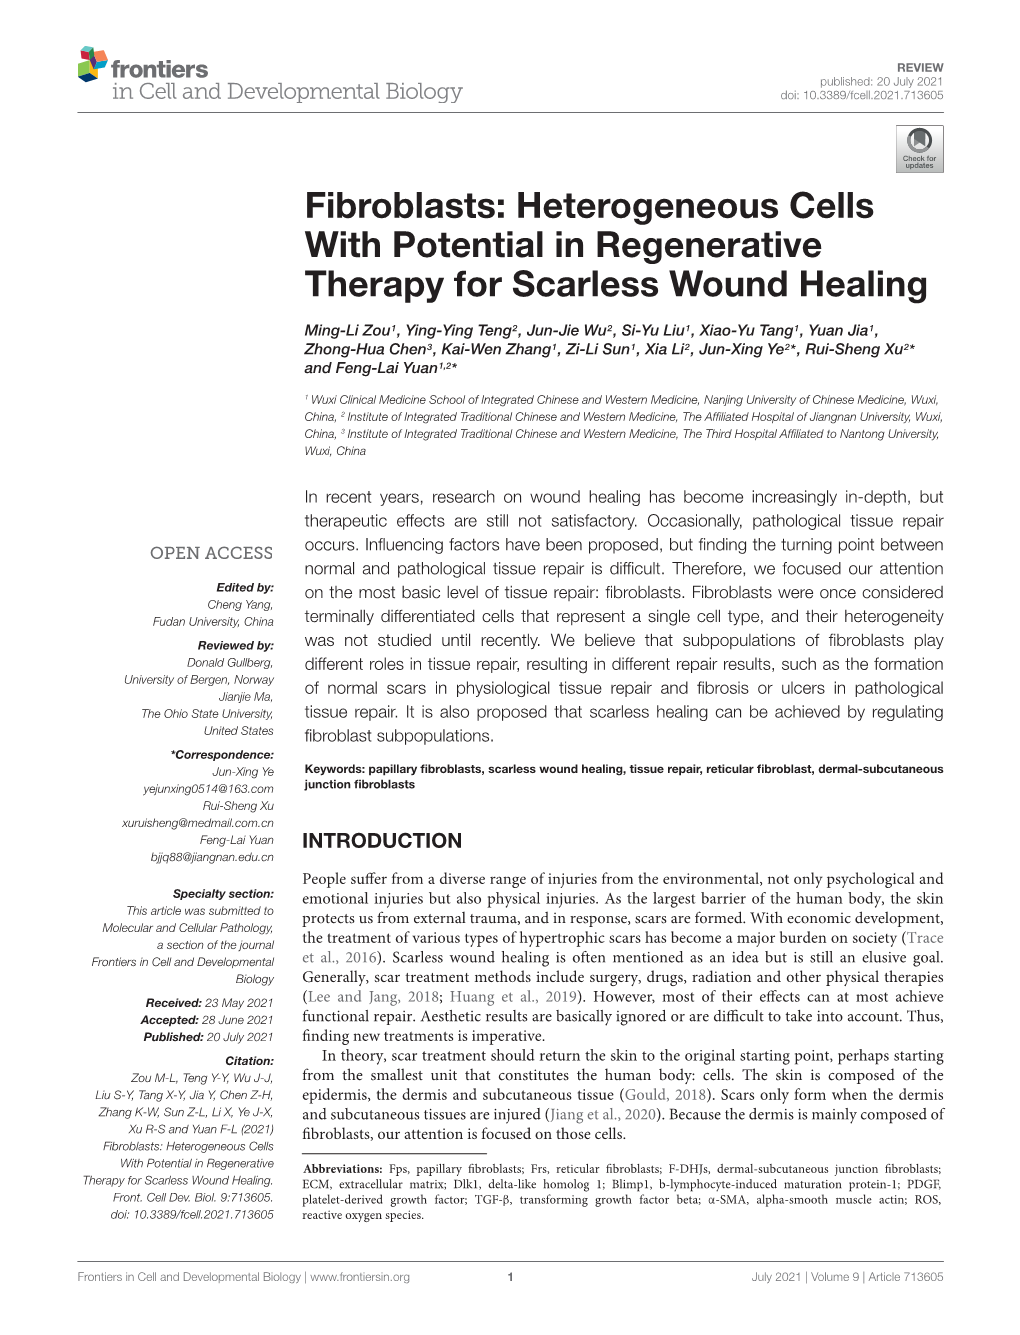 Fibroblasts: Heterogeneous Cells with Potential in Regenerative Therapy for Scarless Wound Healing